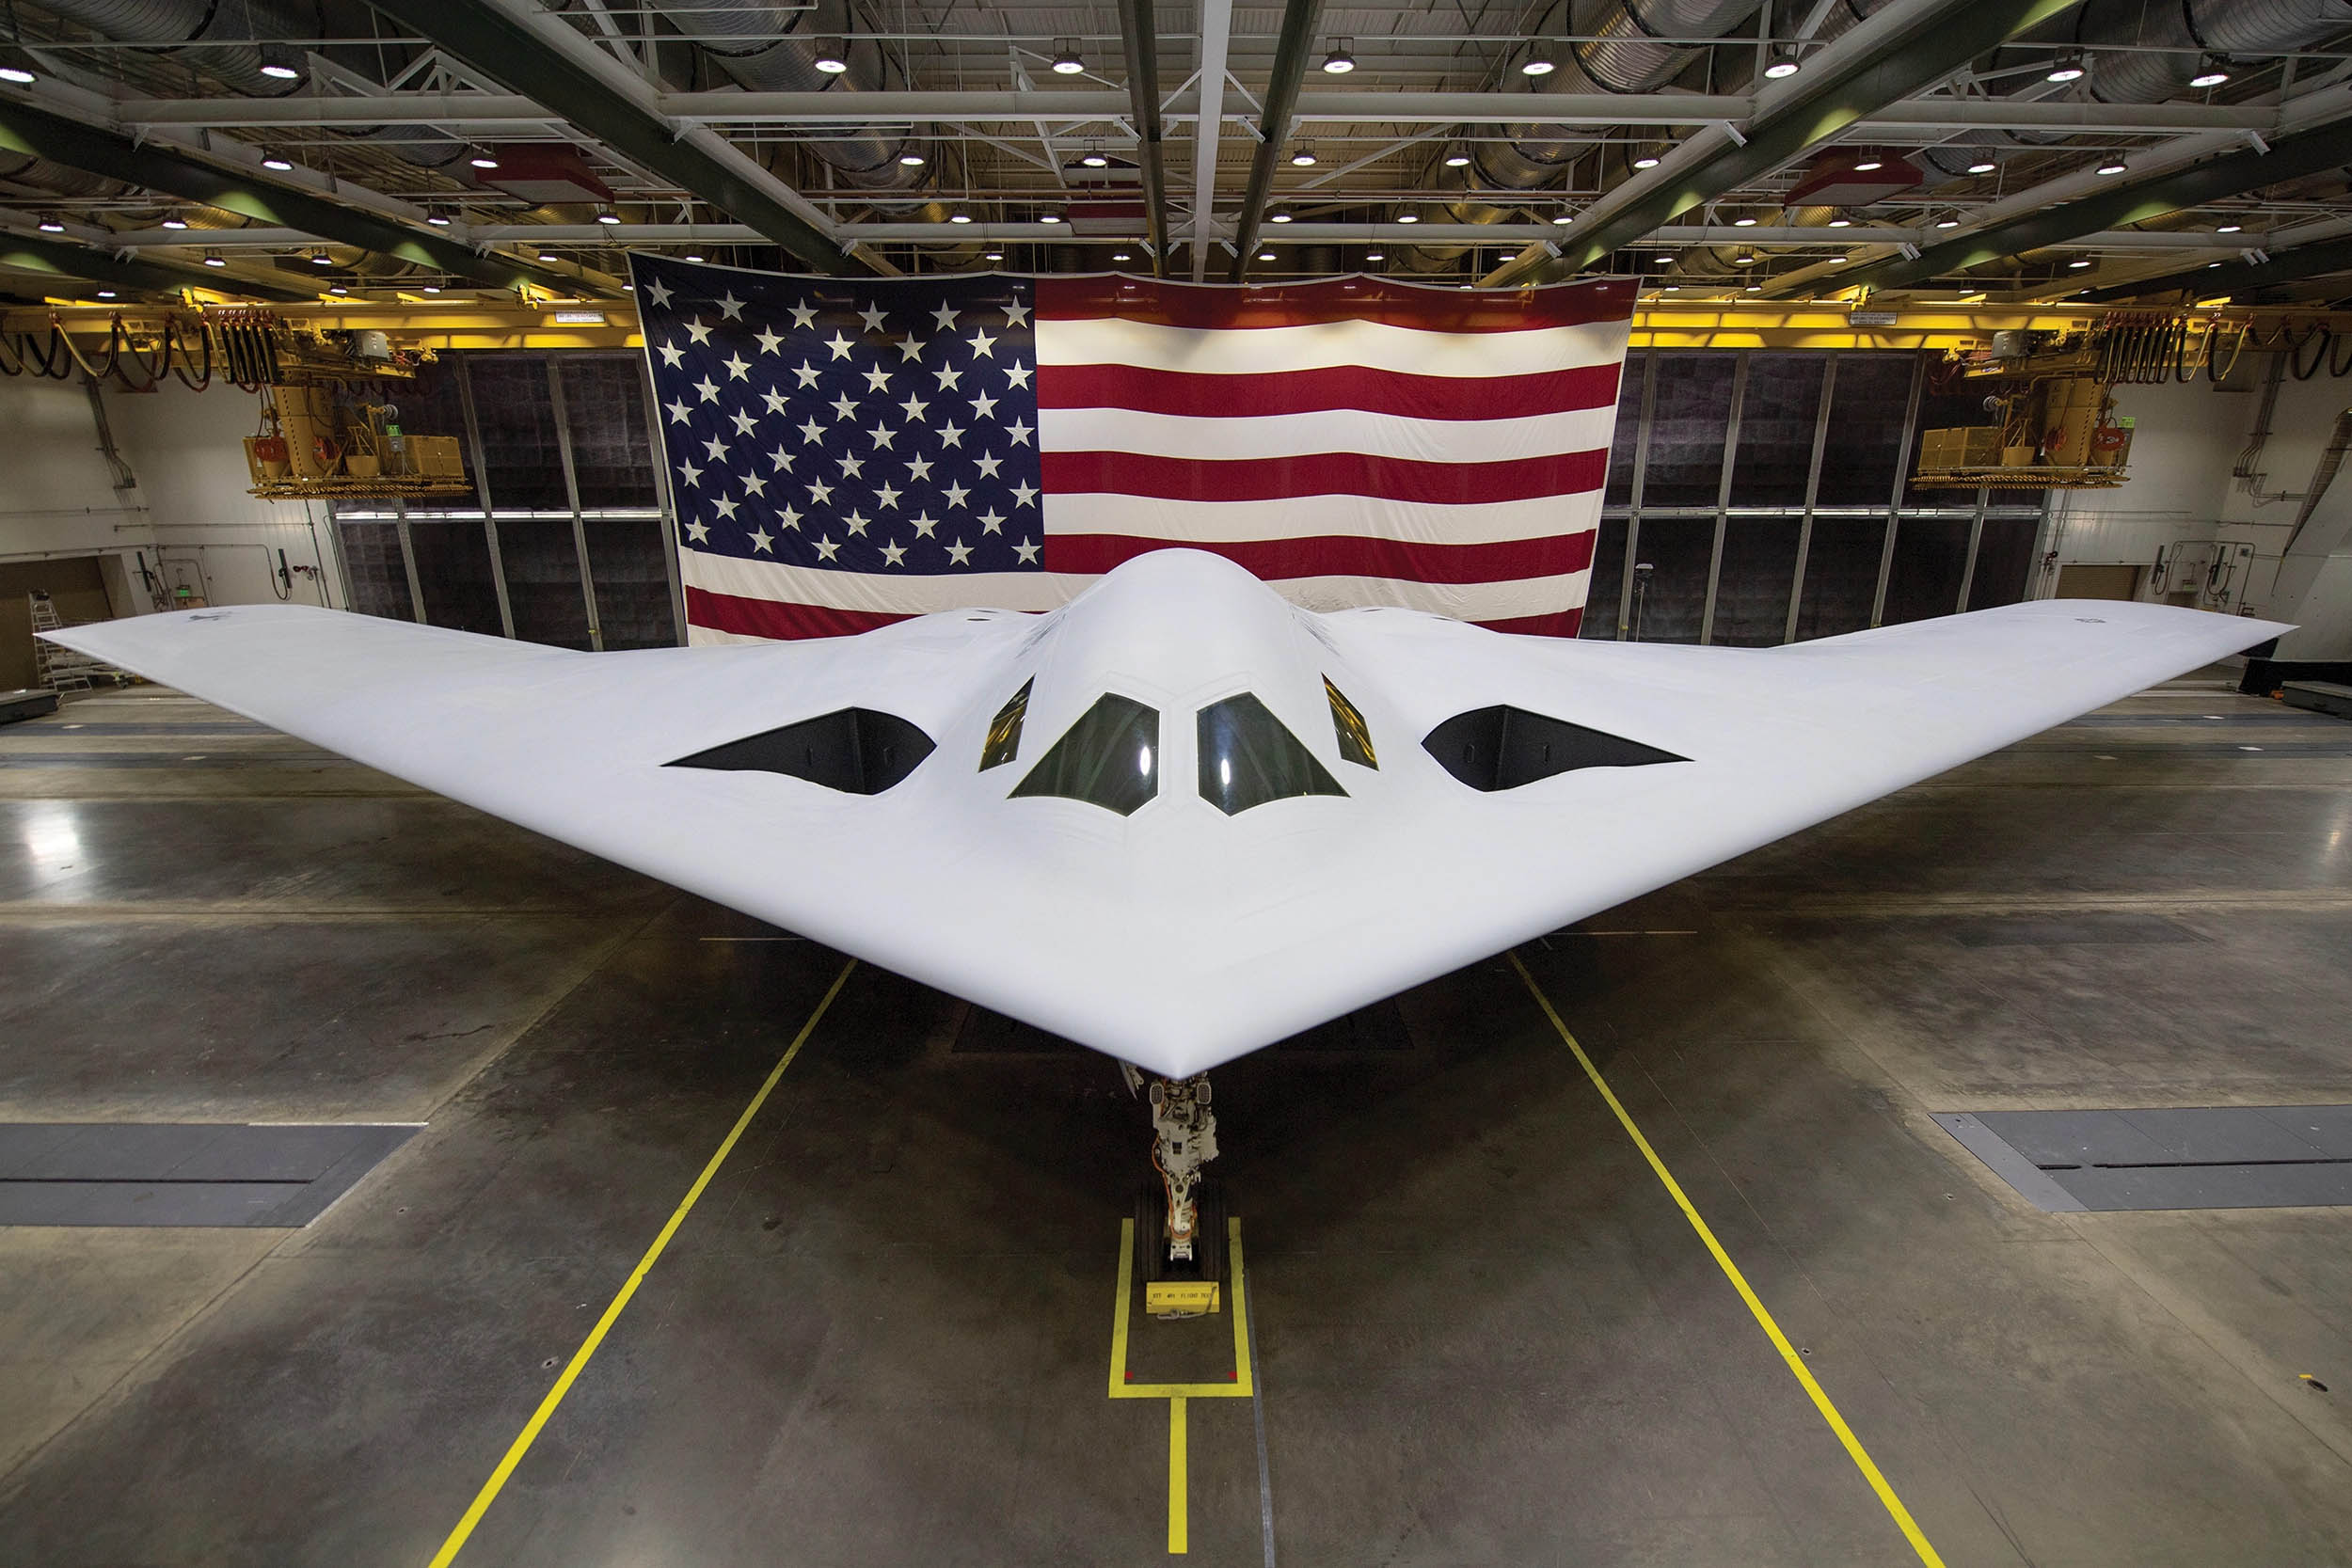 B-21 Raider is unveiled at public ceremony, December 2, 2022, in Palmdale, California (U.S. Air Force)